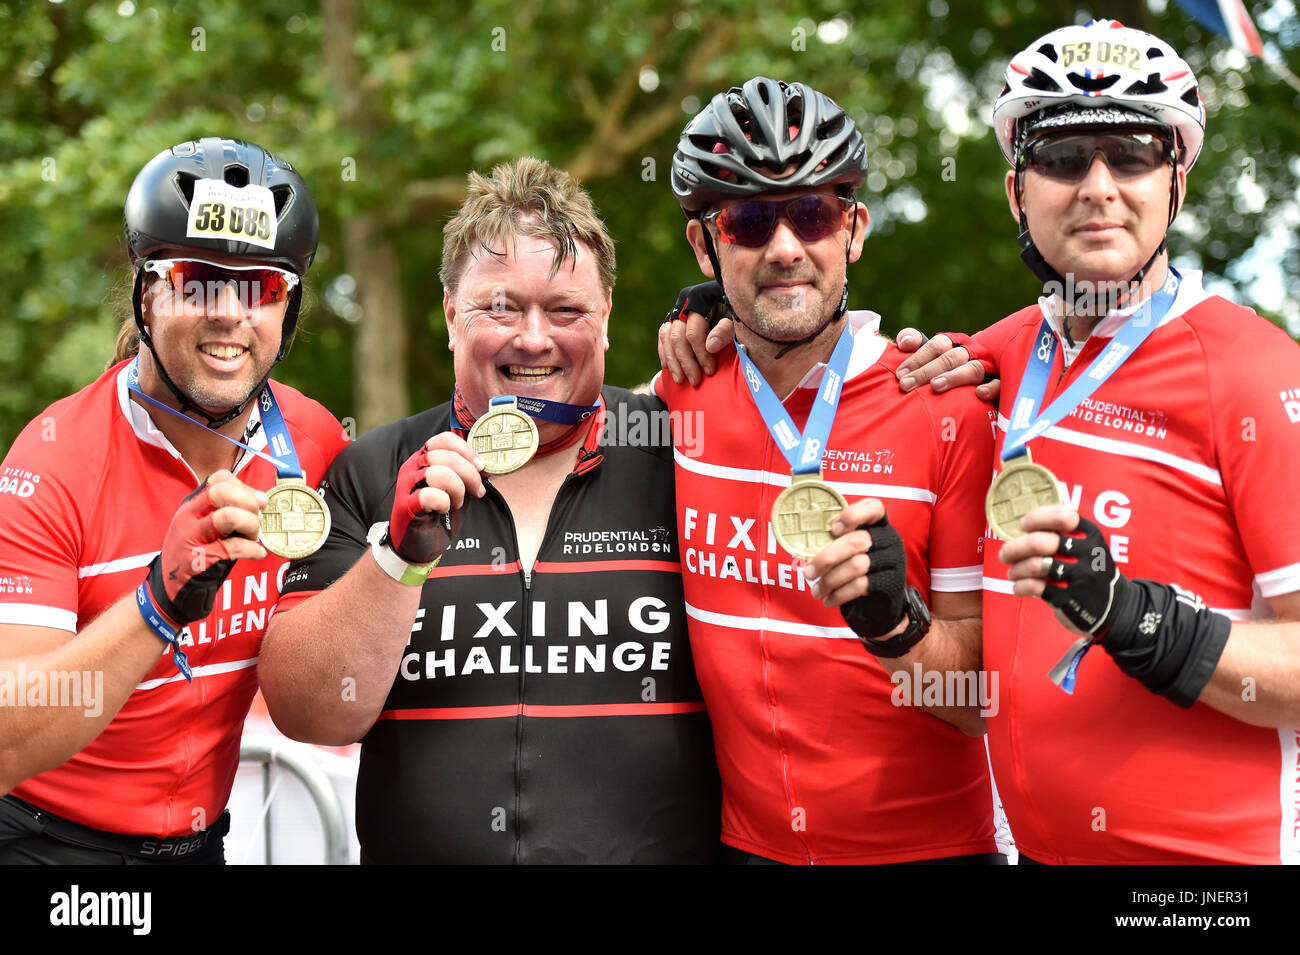 London, UK. 30th July, 2017. Fixing Dad - Adi (Adrian HIGHAM, ADRIAN HIGHAM, 49, from Brookland, Kent: antiques dealer) and his Fixing Challenge team posed photo for the press after they completed tech 100 miles ride at Prudential RideLondon Classic on Sunday, July 30, 2017, LONDON ENGLAND: Photo : Taka G Wu Credit: Taka Wu/Alamy Live News Stock Photo